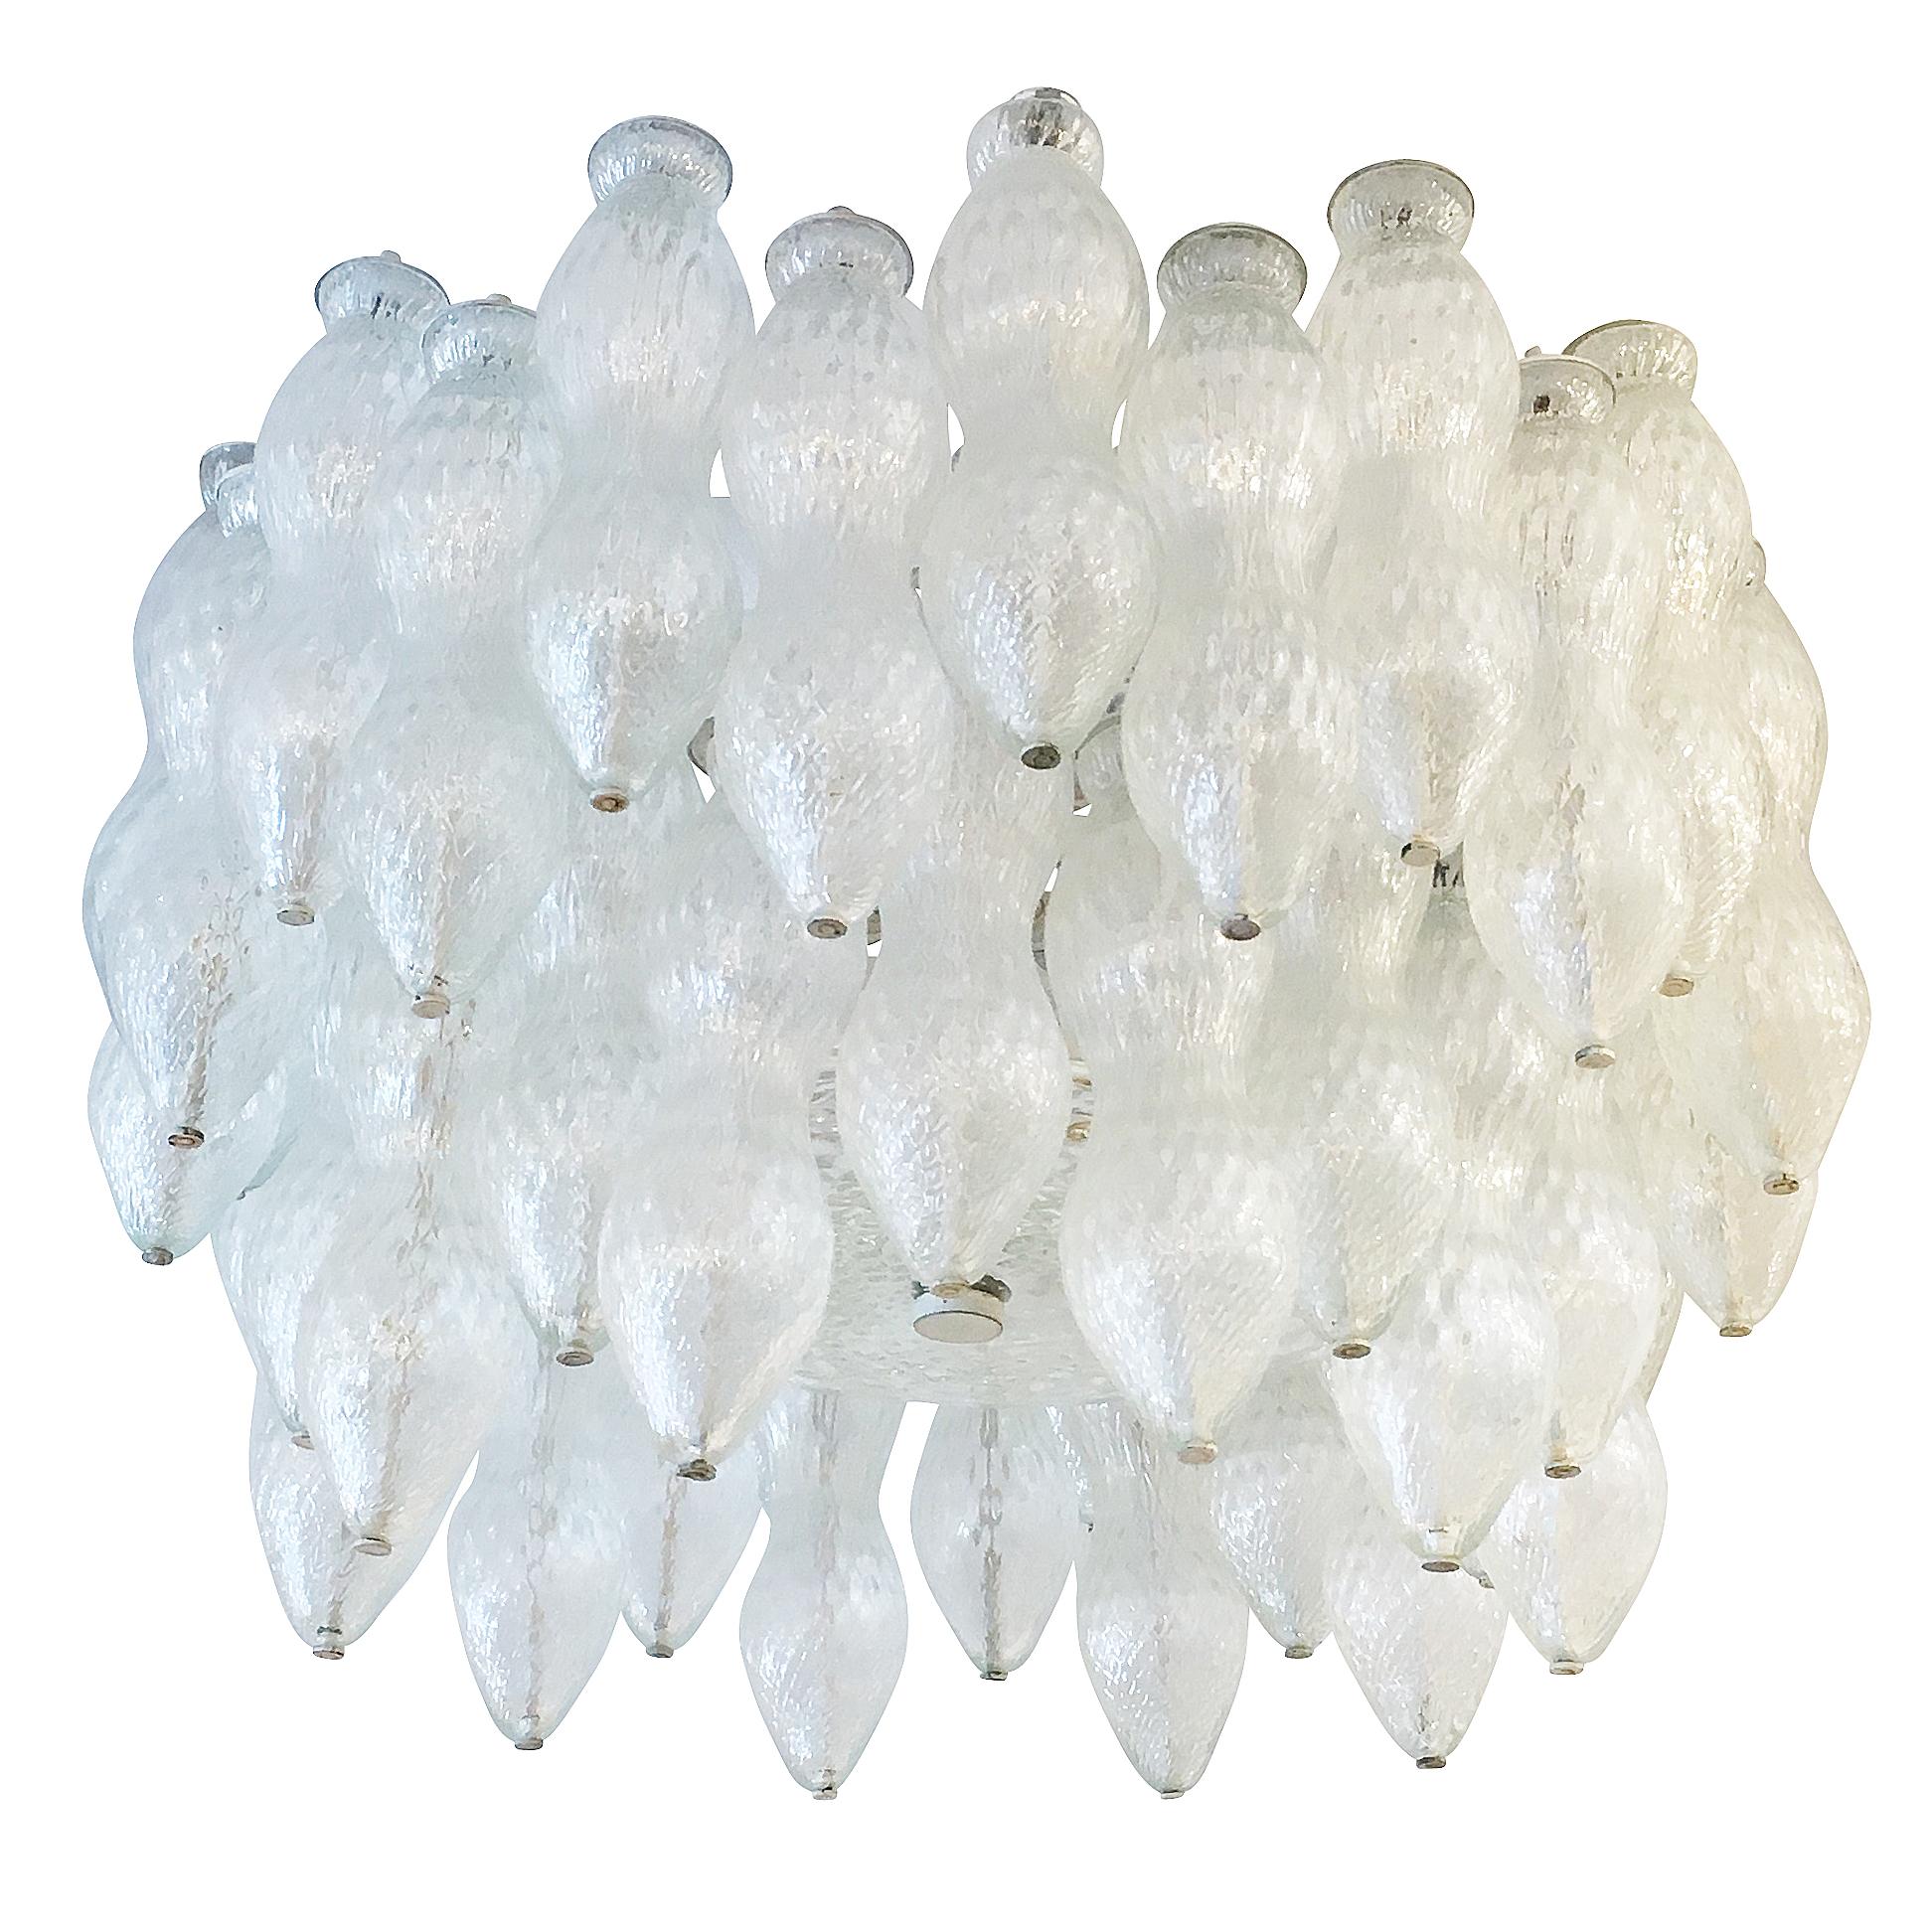 Midcentury chandelier by famous Murano glass maker Seguso. Features two rows of handblown glasses and is closed at the bottom by a textured glass disk. The glasses are clear with a slight iridescence. Holds nine candelabra sockets. Can be mounted on